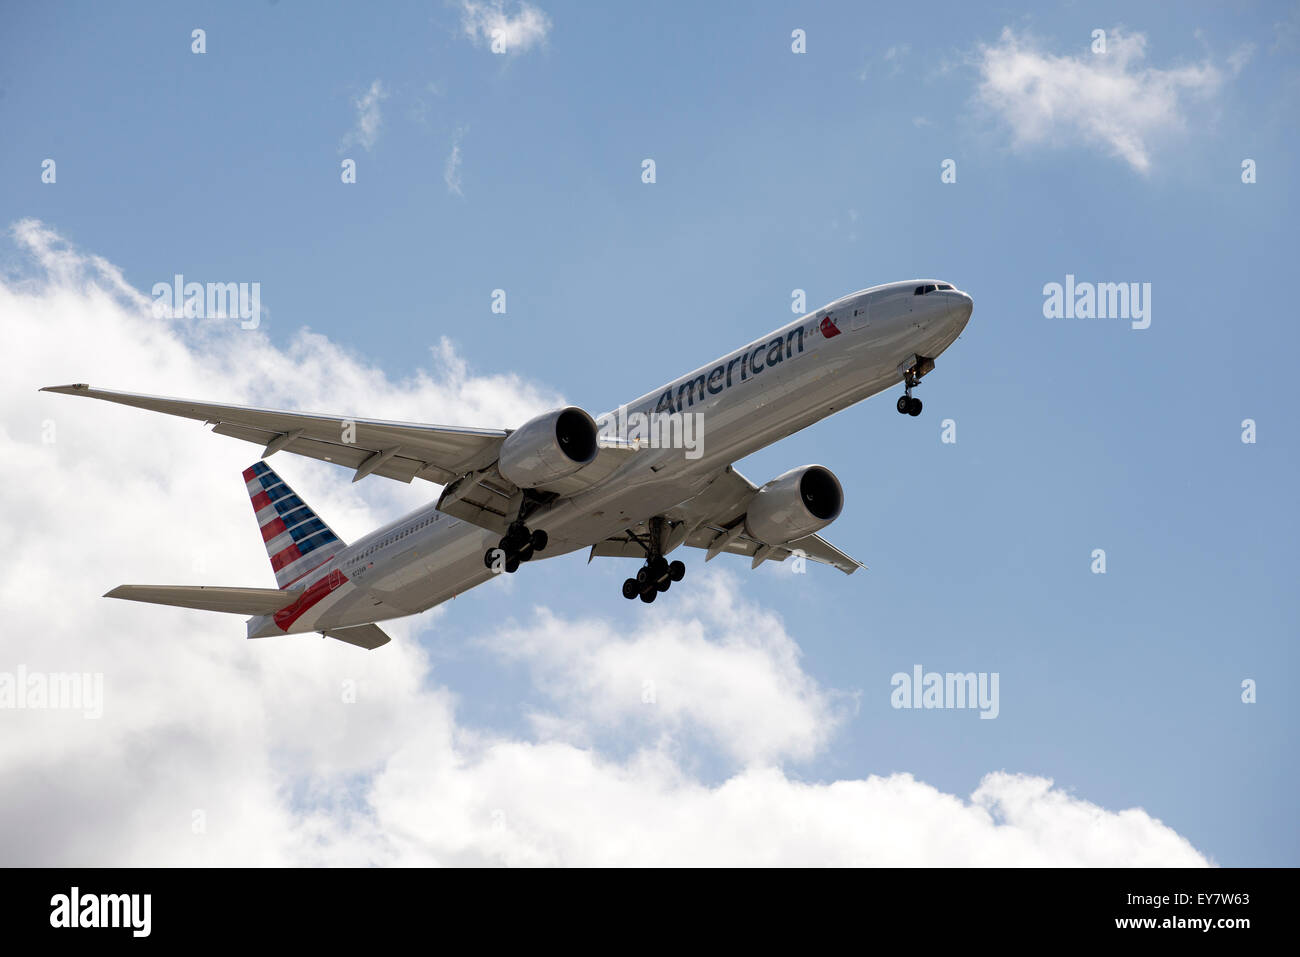 American Airlines Boeing 777 with landing gear down in preparation to land Stock Photo